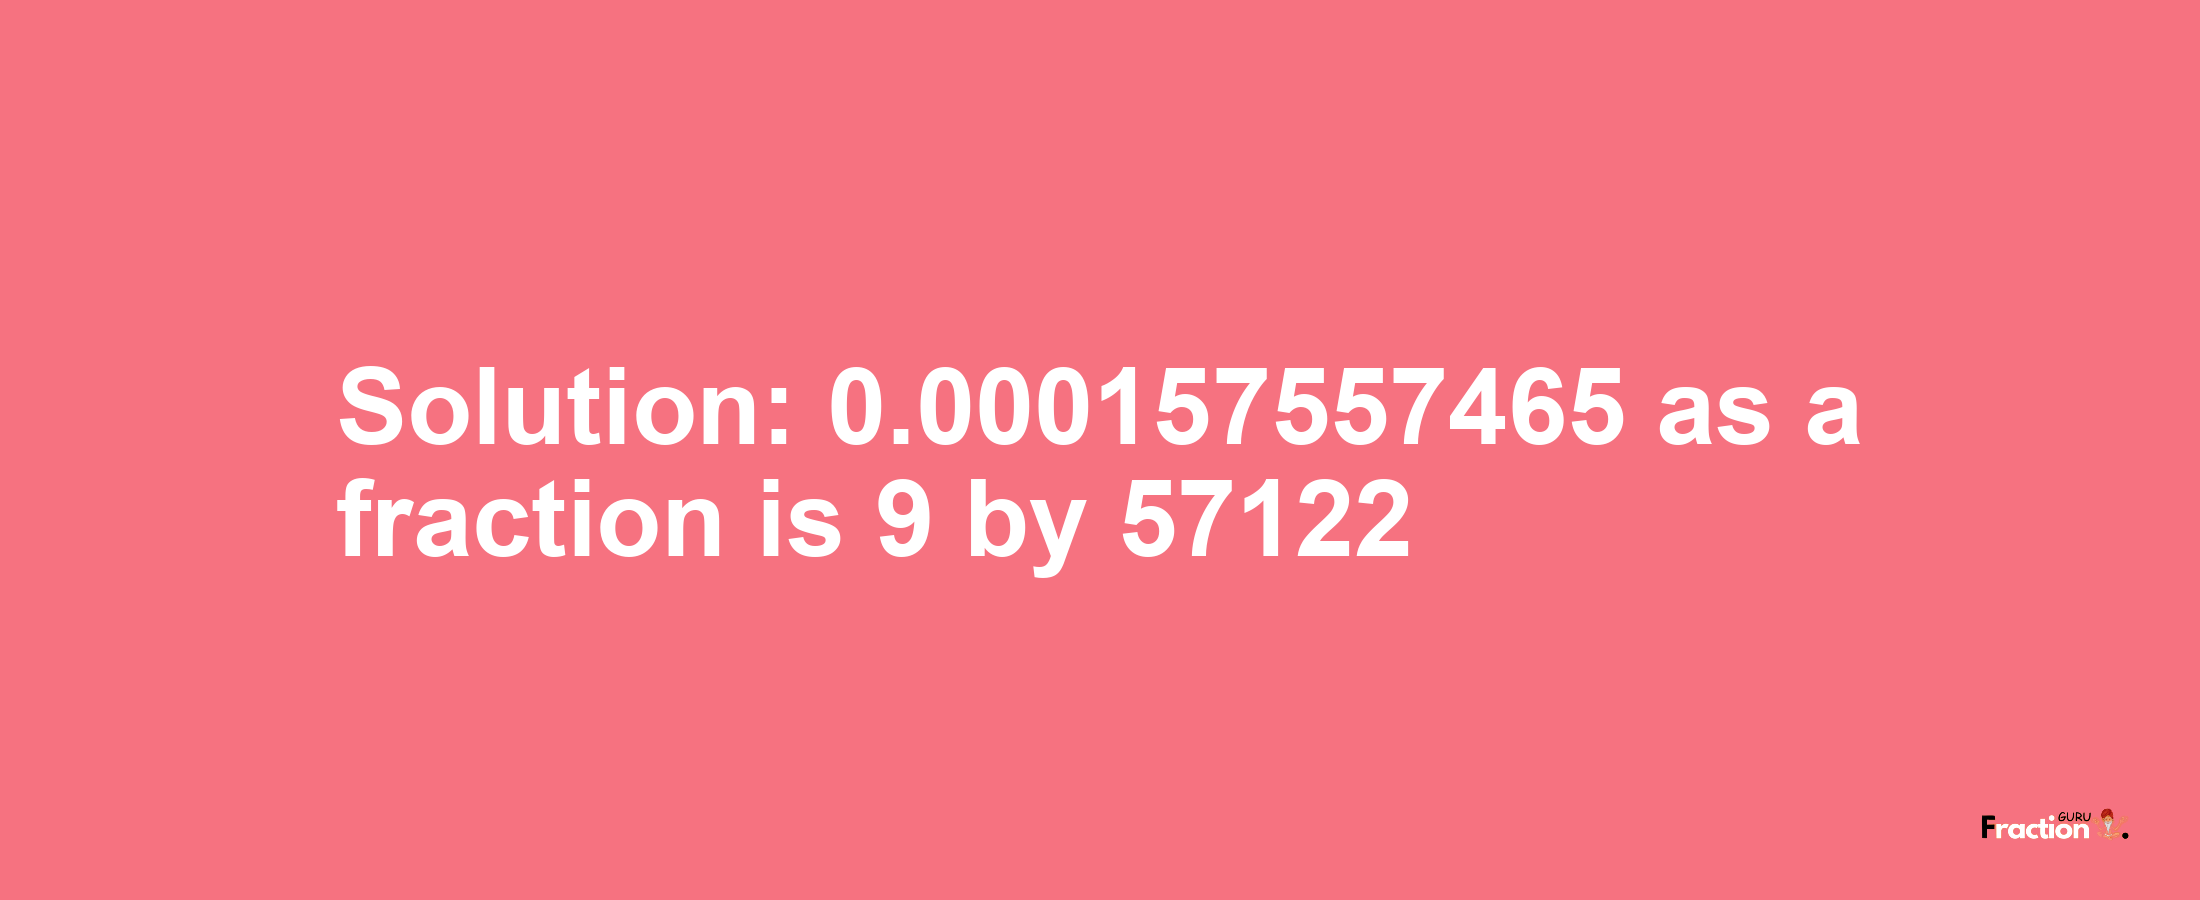 Solution:0.000157557465 as a fraction is 9/57122